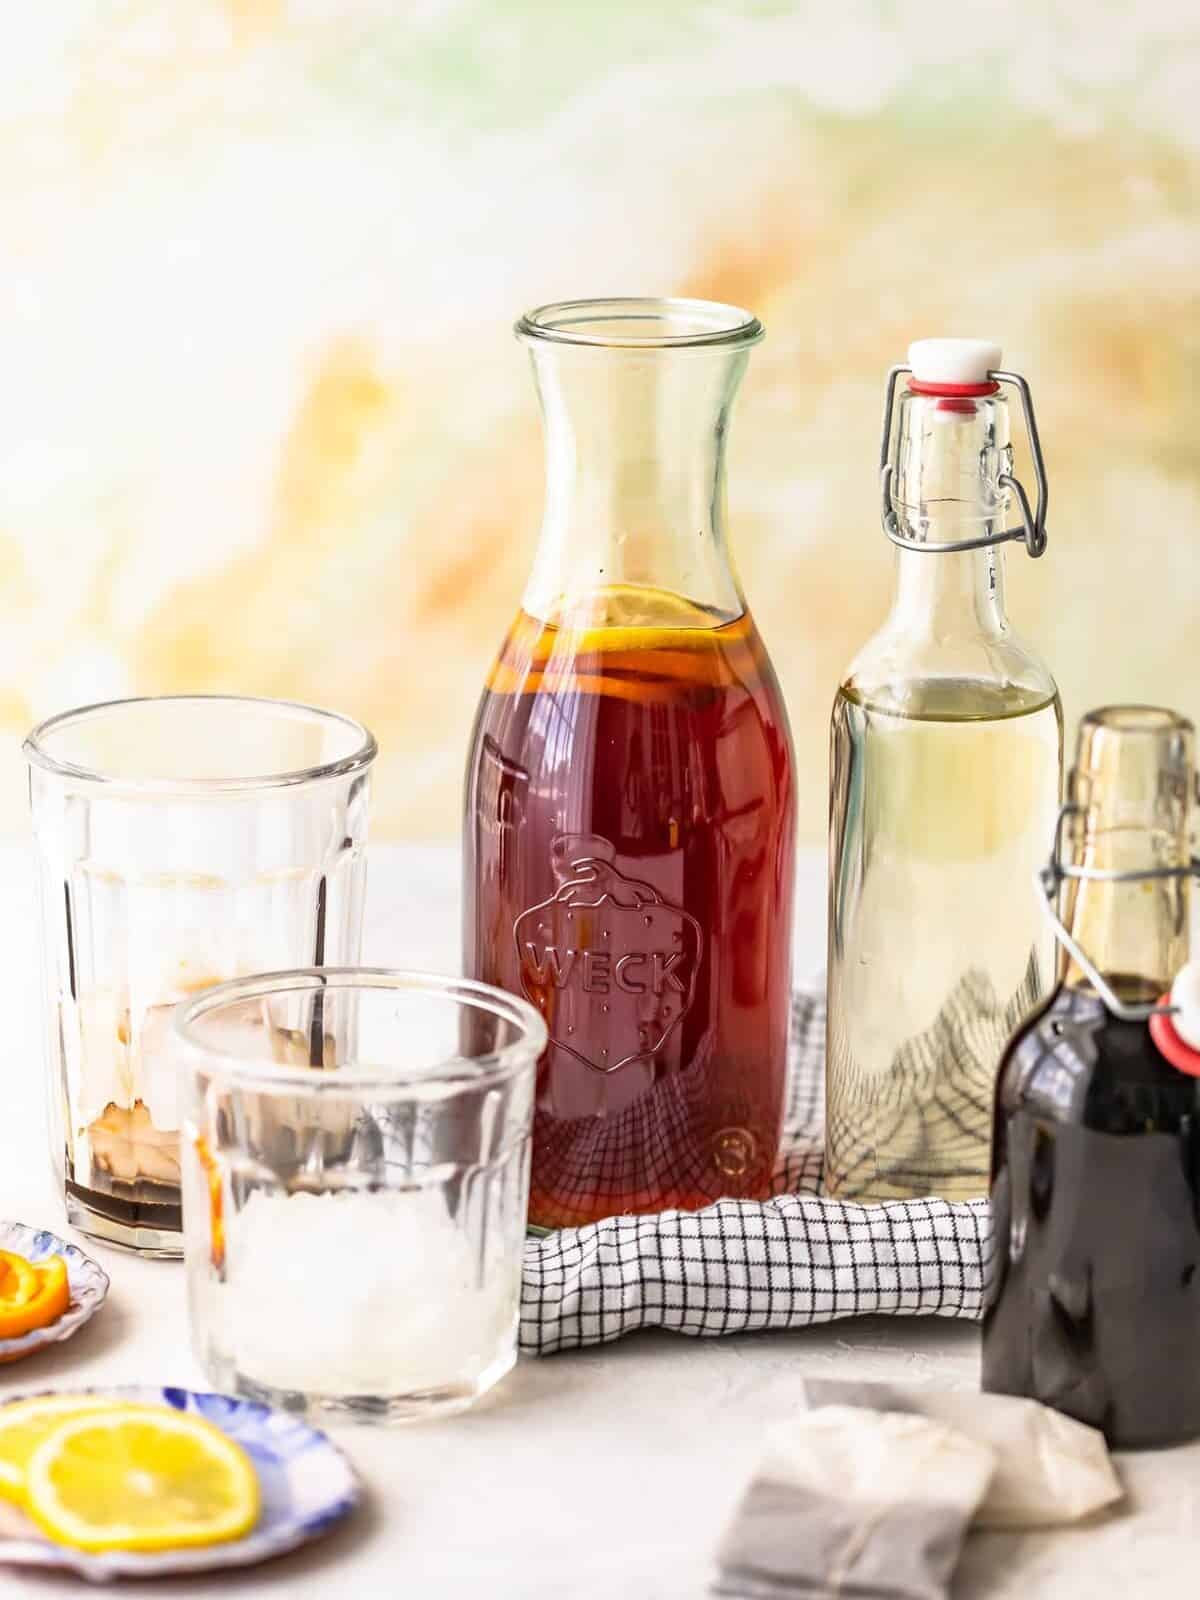 A pitcher of sweet tea, a jar of simple syrup, glasses of ice, and tea bags arranged on a countertop.